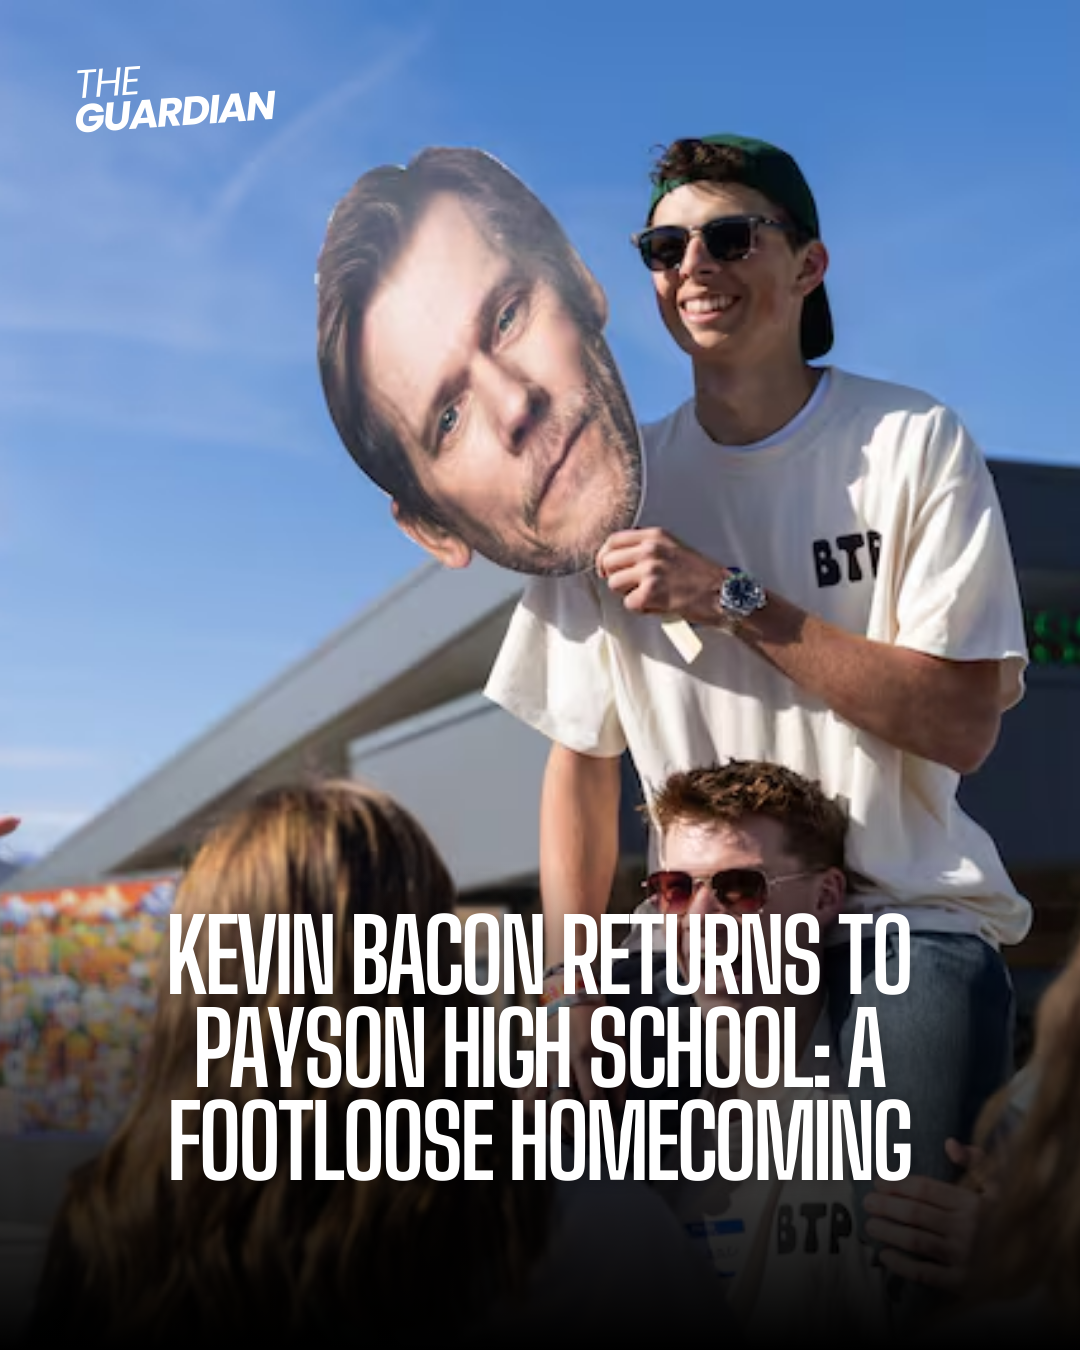 Actor Kevin Bacon returns triumphantly to Payson High School in Utah, one of Footloose's original filming locations.